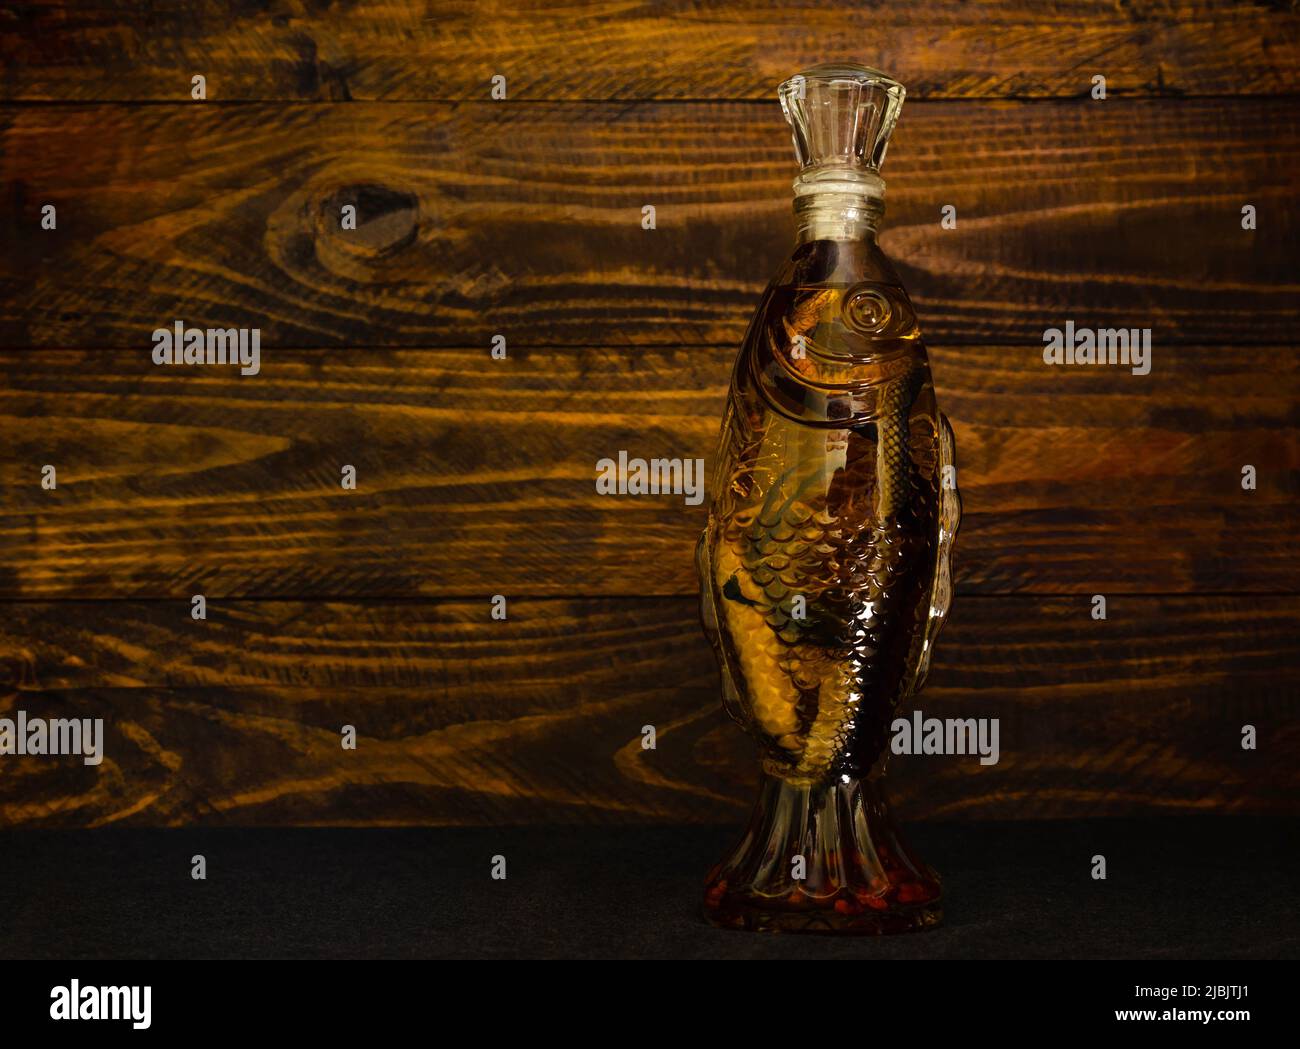 Bottle of alcohol in the form of a fish with a snake inside on a dark wooden background. Traditional Asian liquor. A snake in a bottle Stock Photo